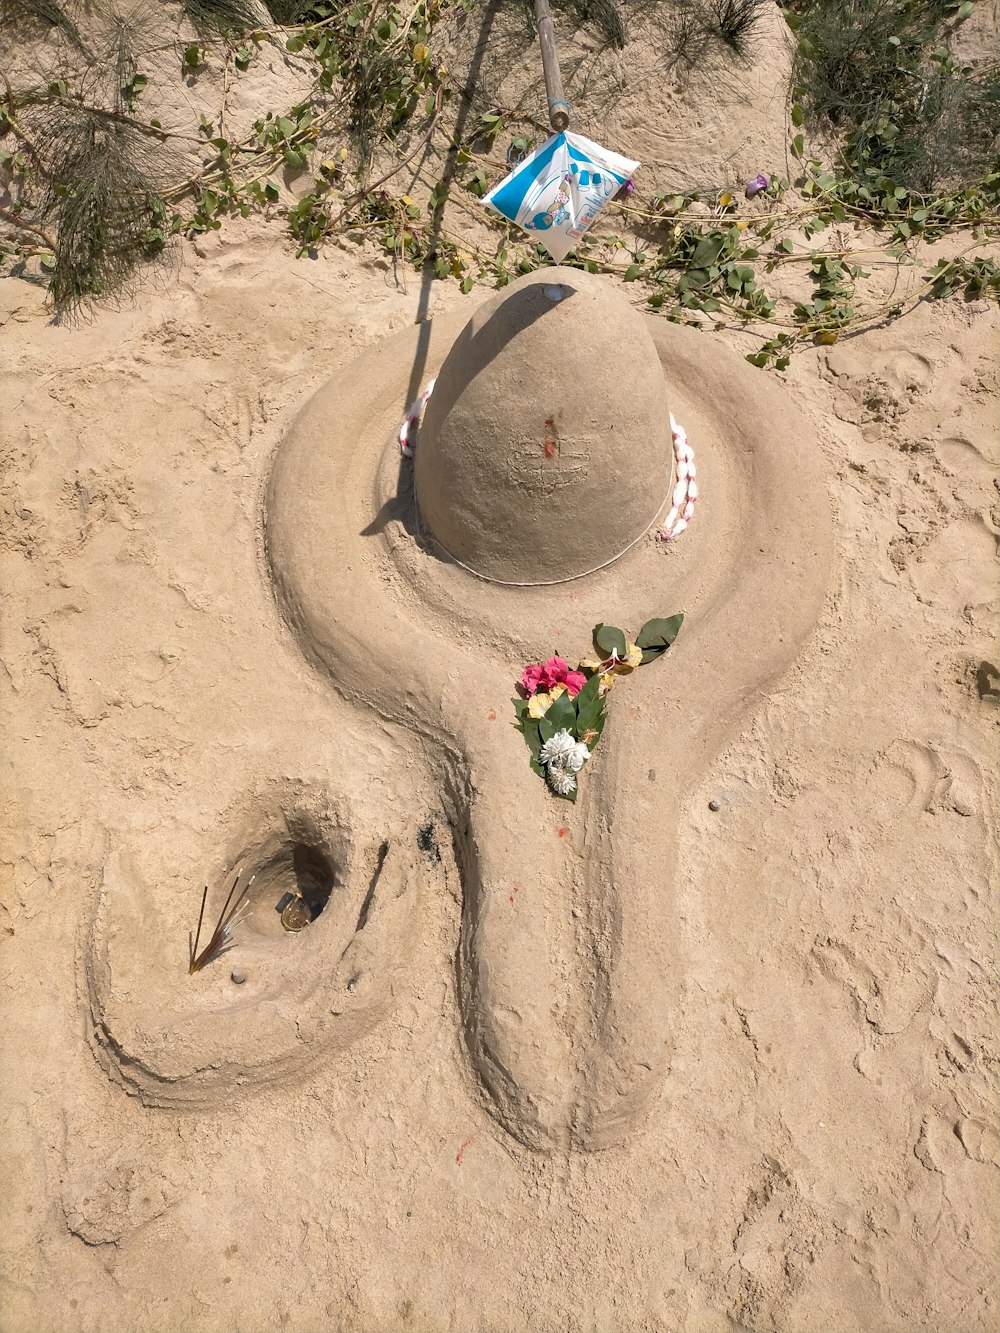 a sand sculpture with flowers and a street sign